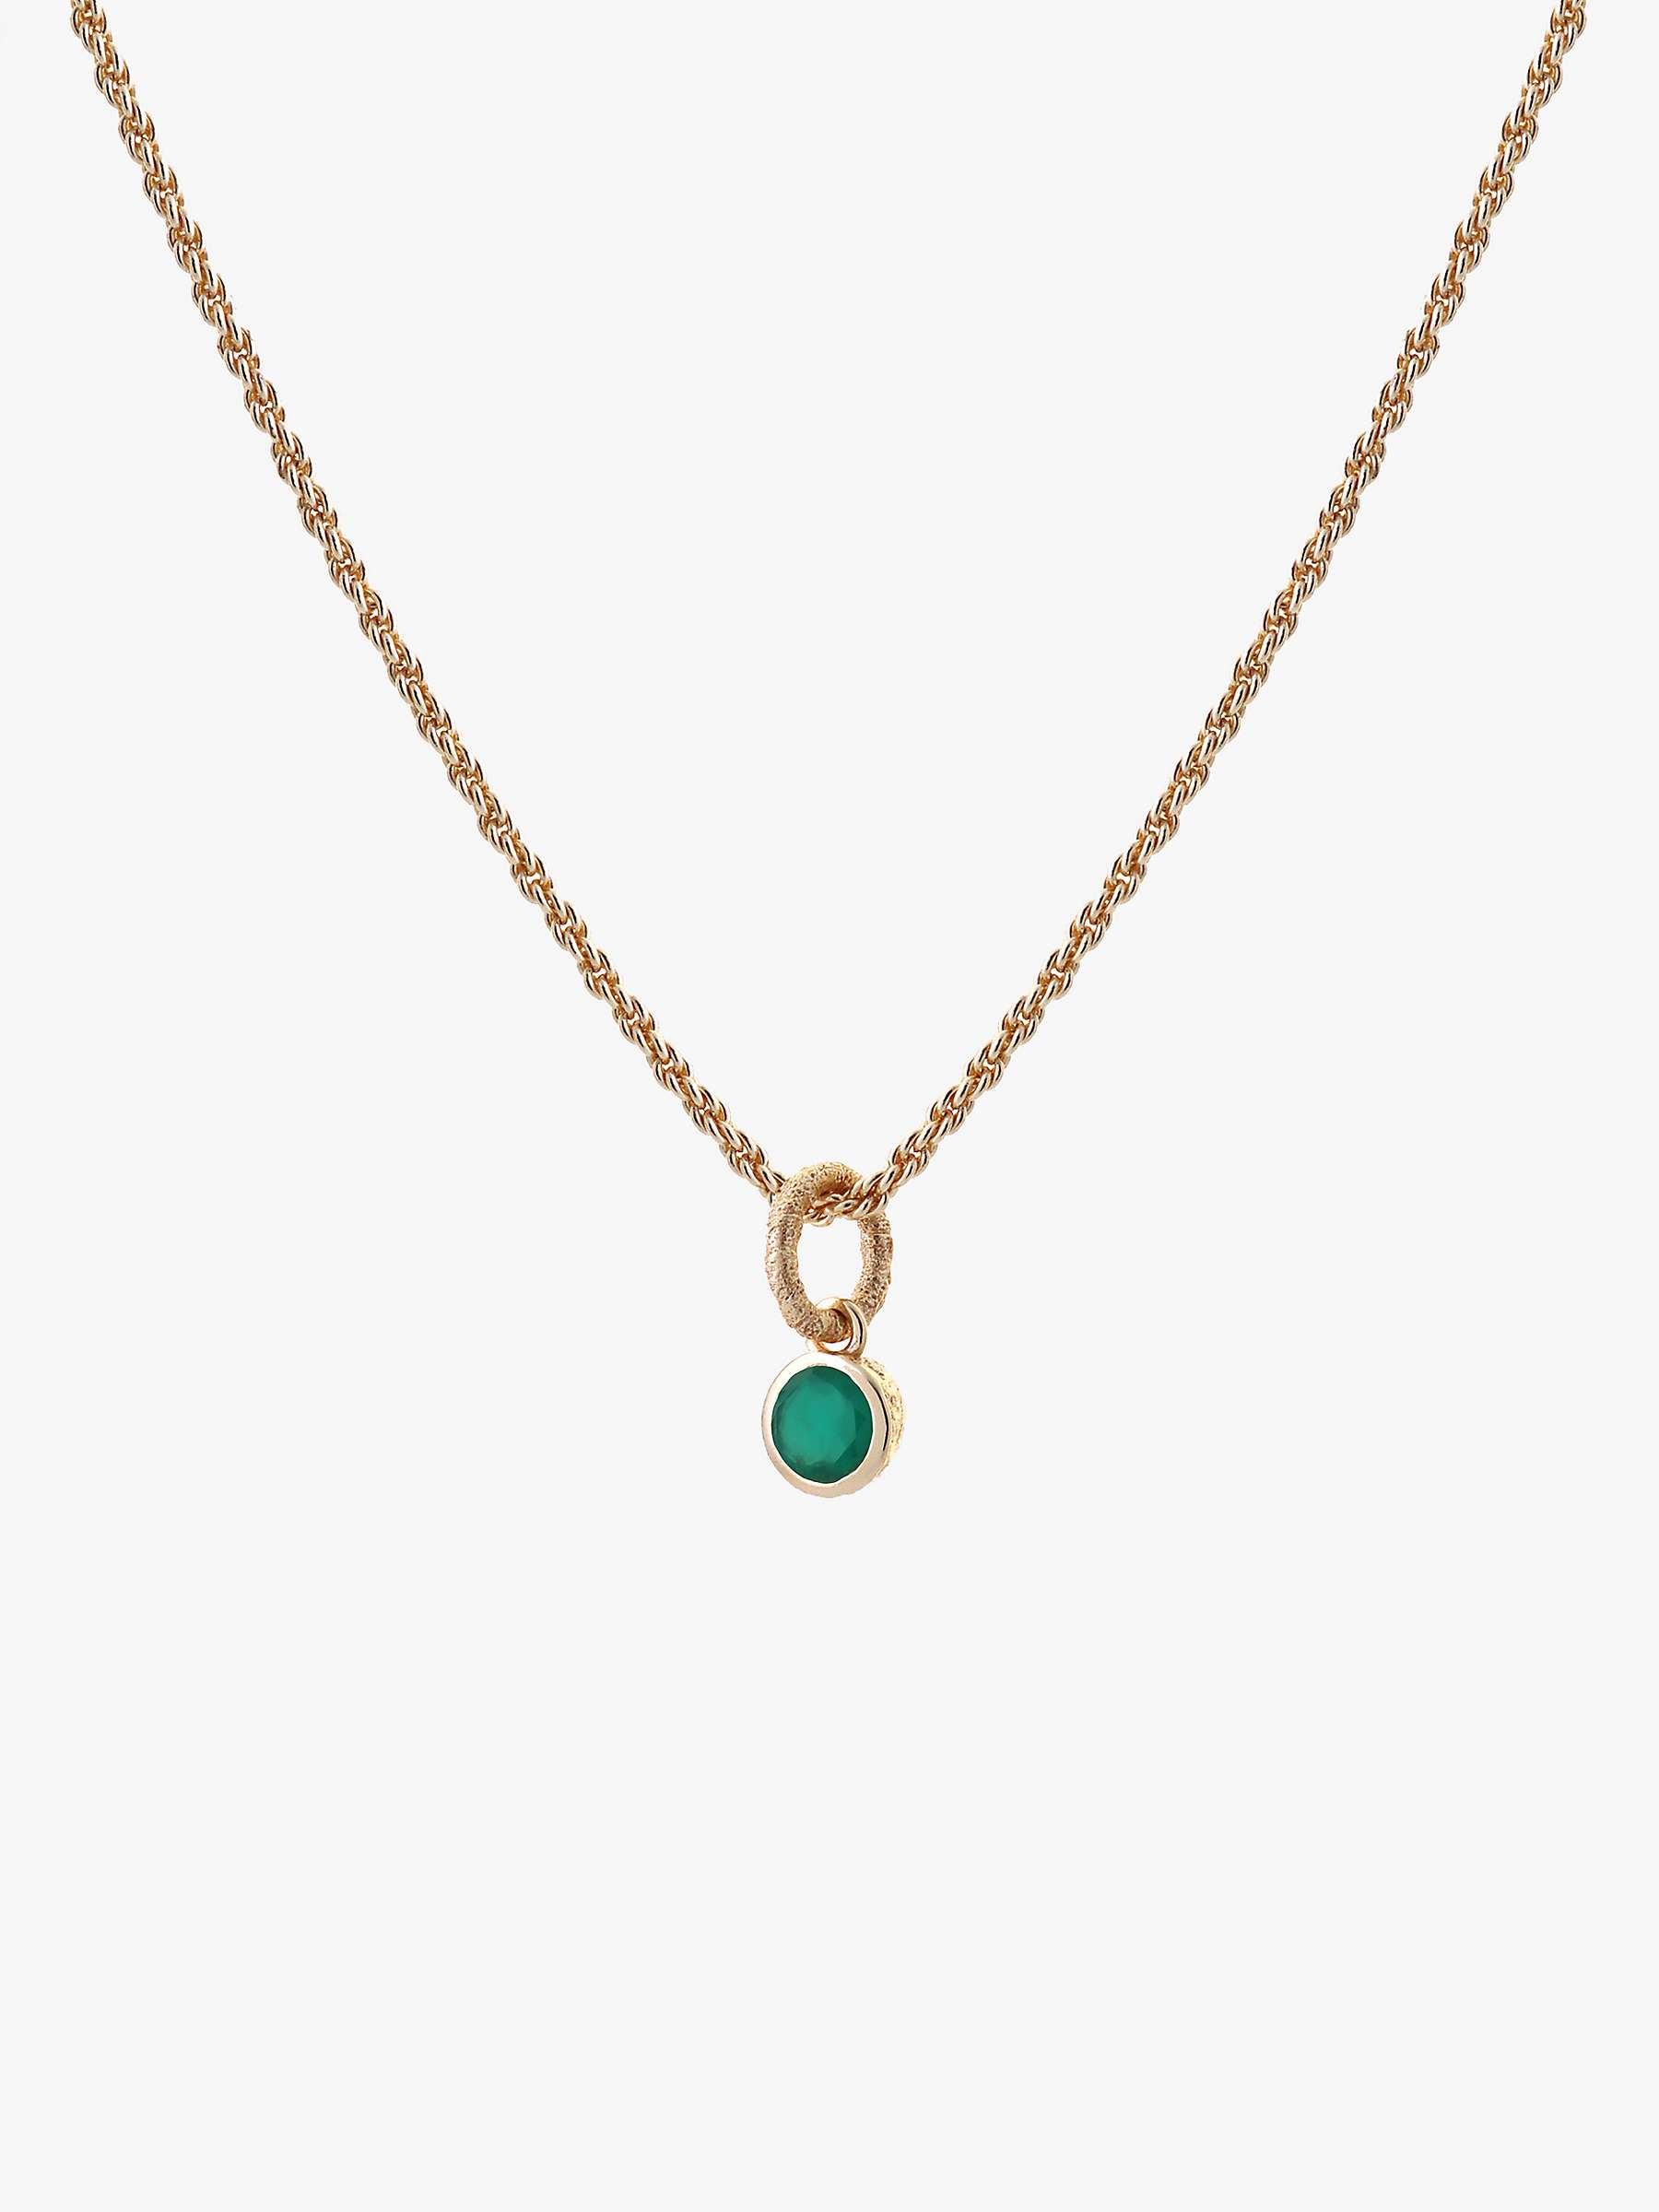 Buy Tutti & Co May Birthstone Necklace, Green Onyx Online at johnlewis.com